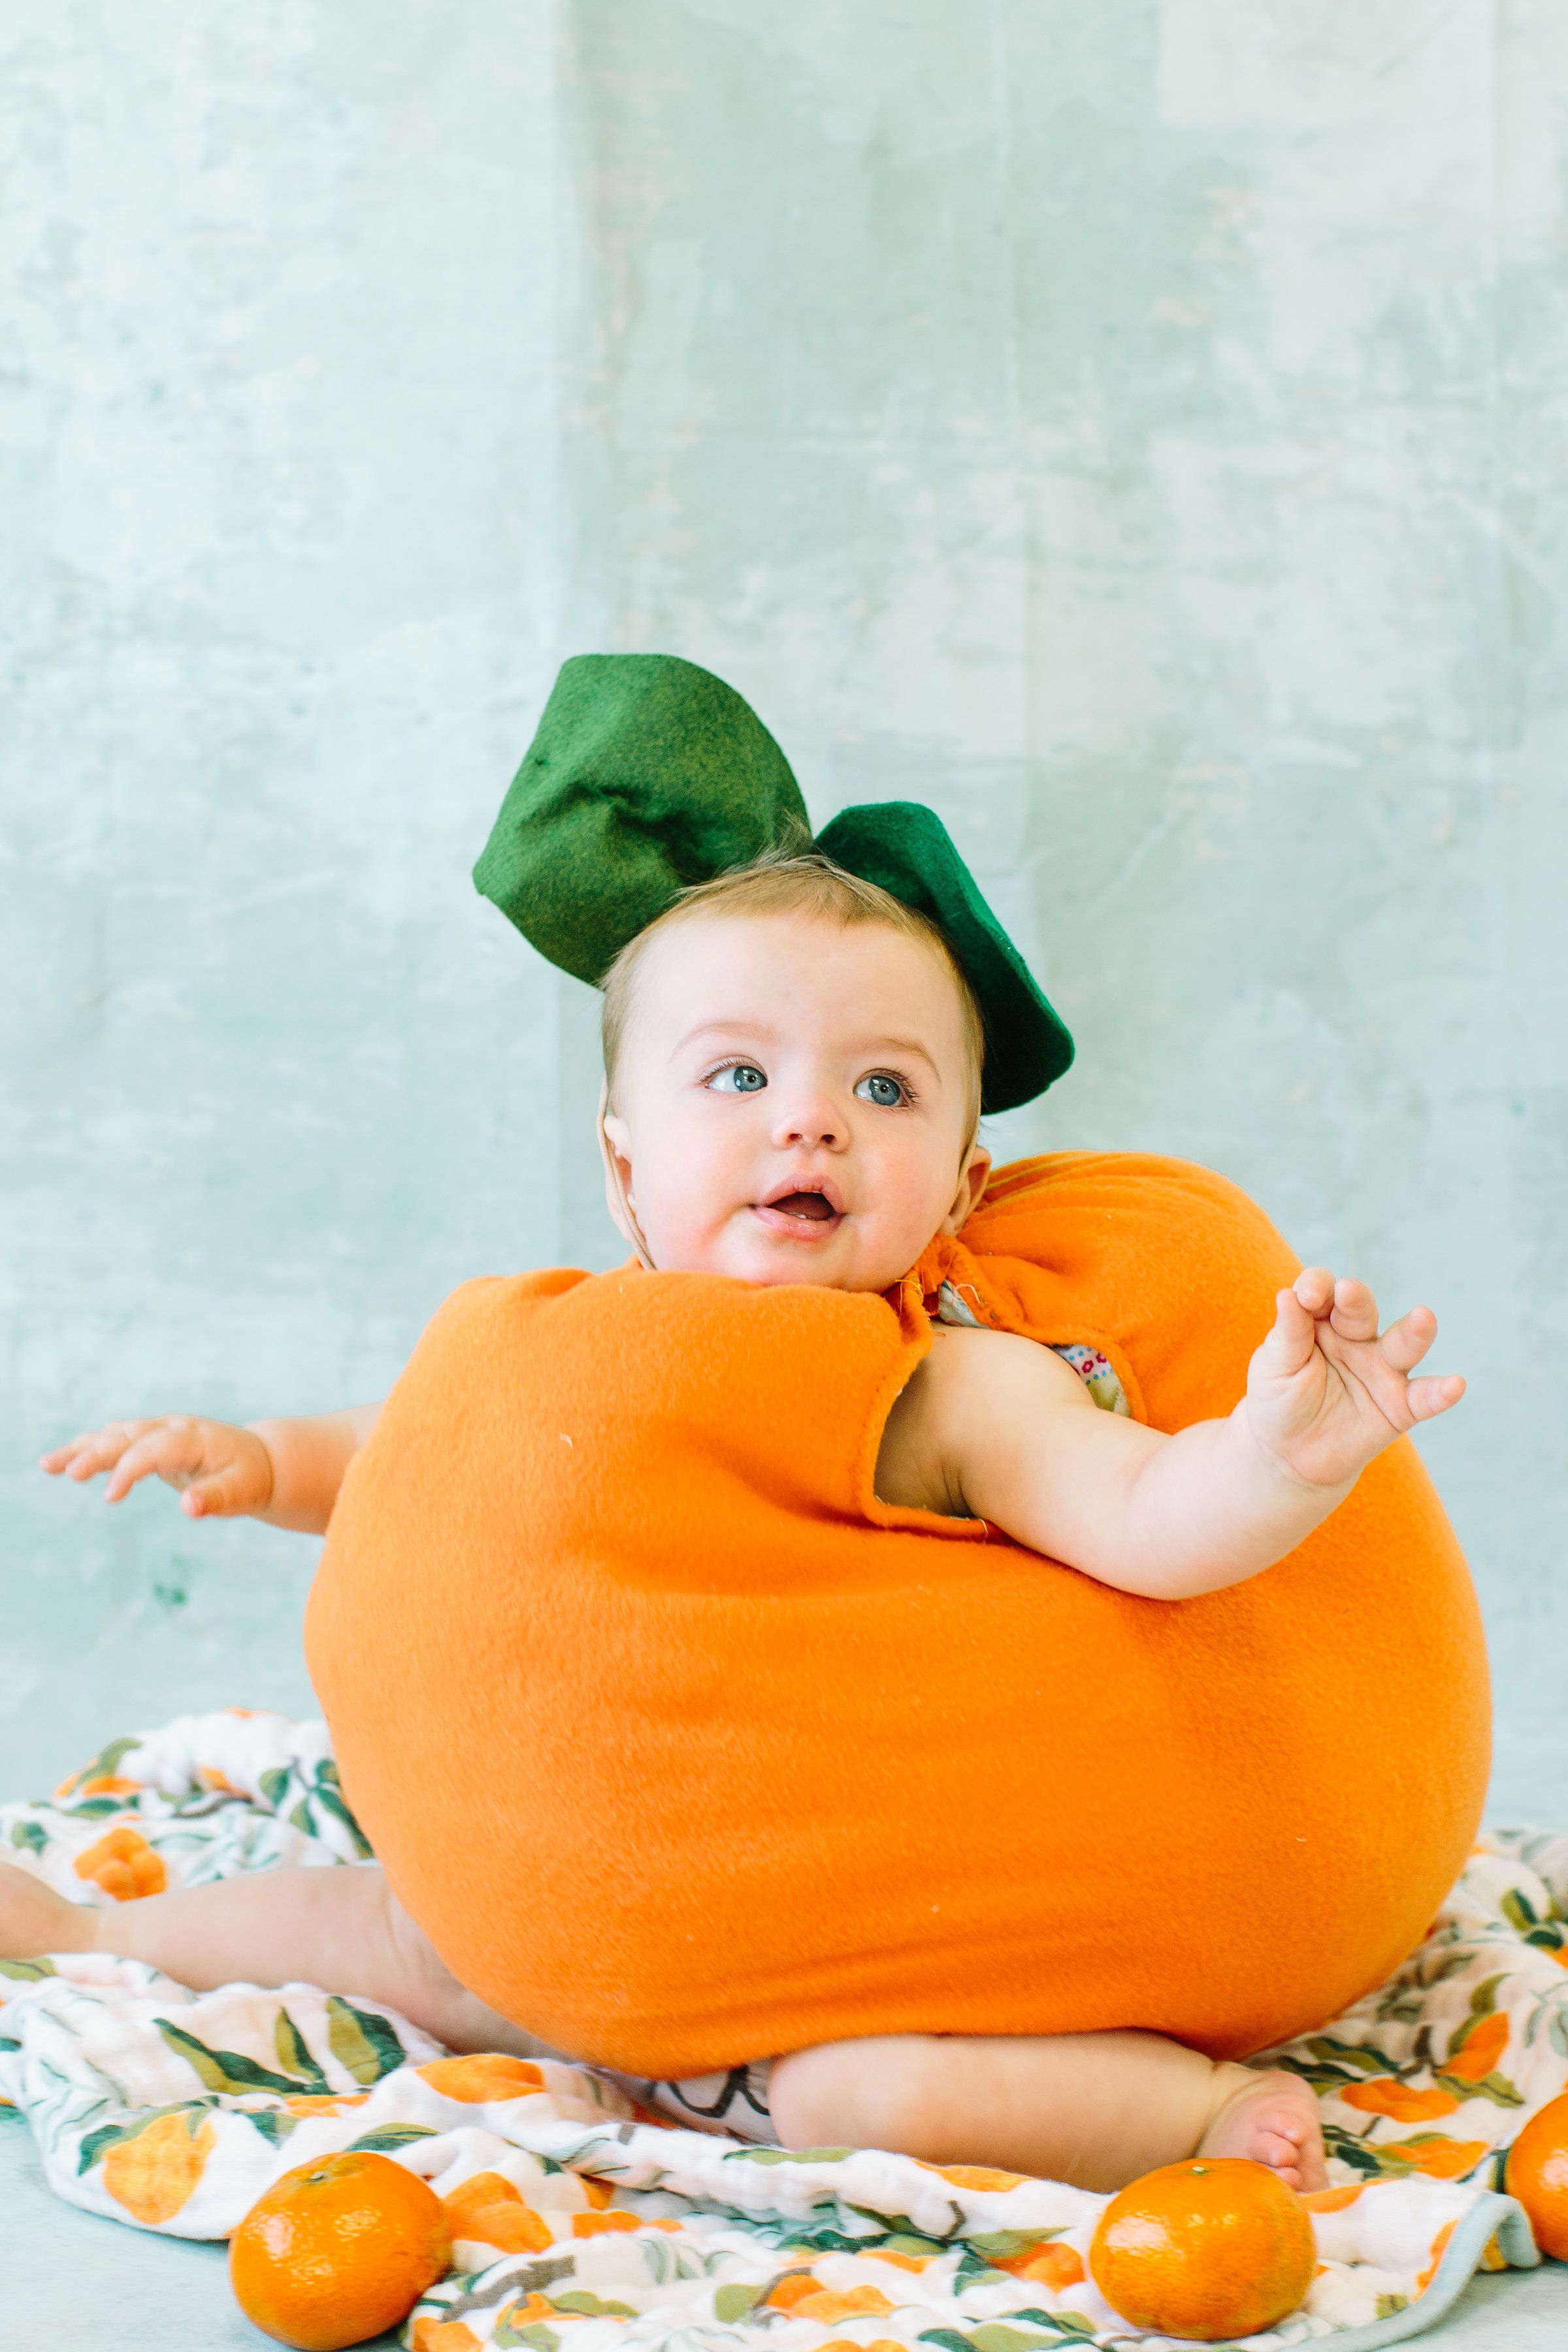 Clementine Swaddle | Kids costumes, Baby costumes, Halloween costumes